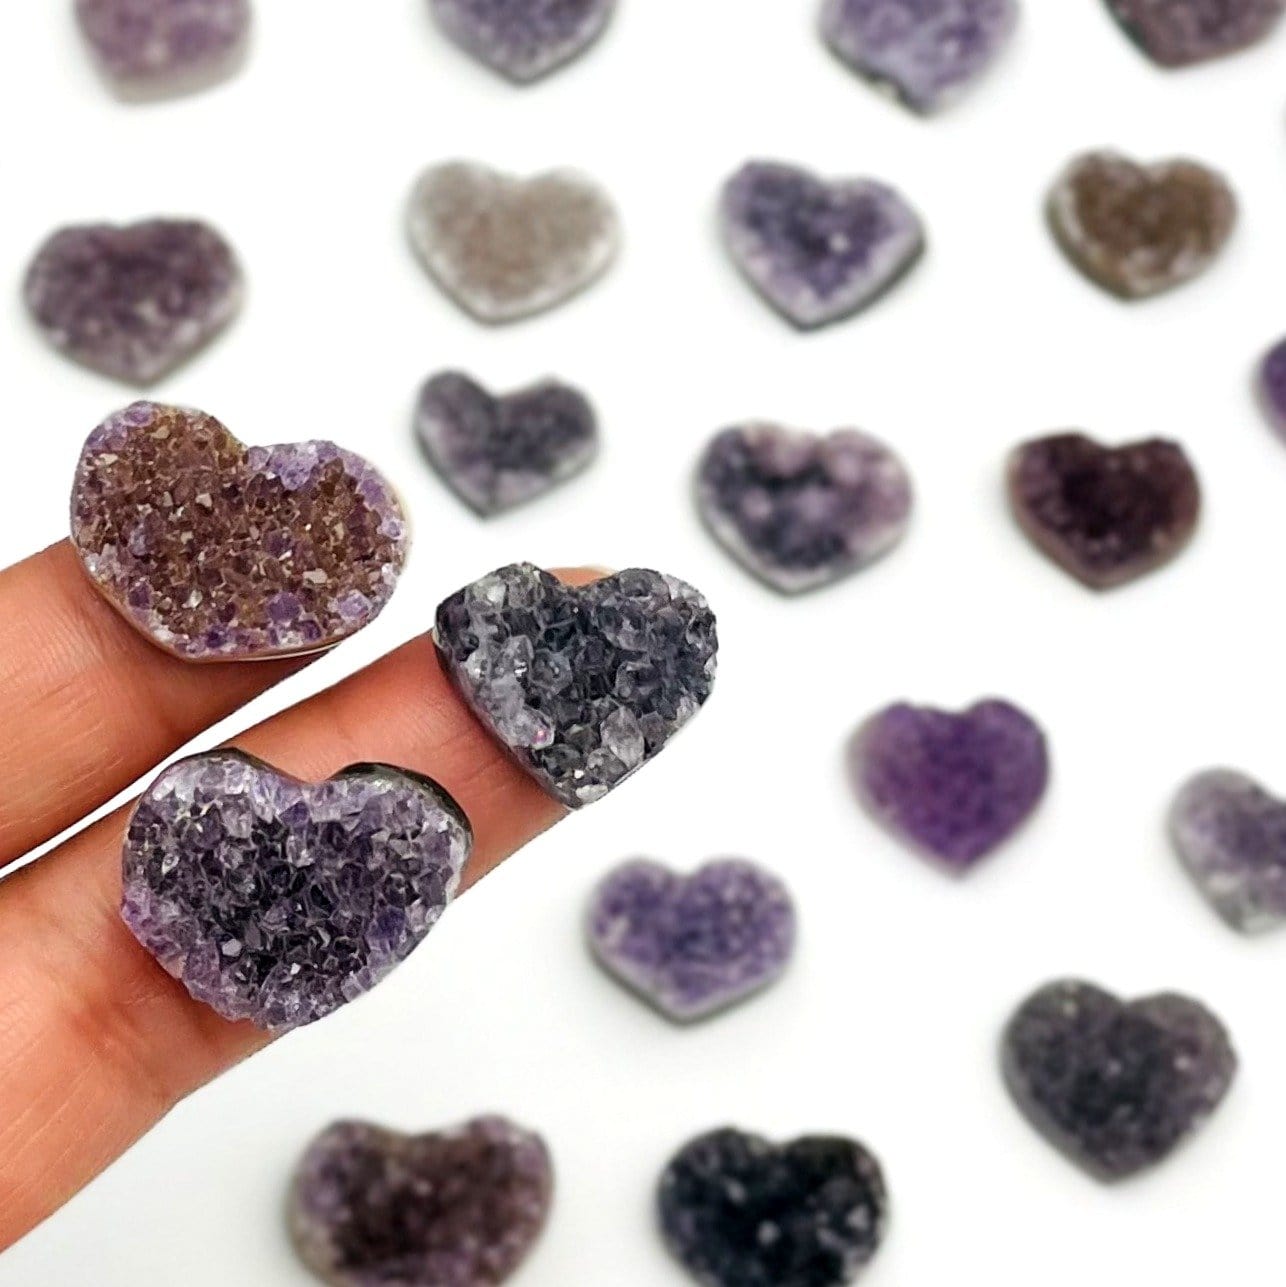 Assorted shades of amethyst hearts in light purple, dark purple, black, purple with brown and other variety on a white background.